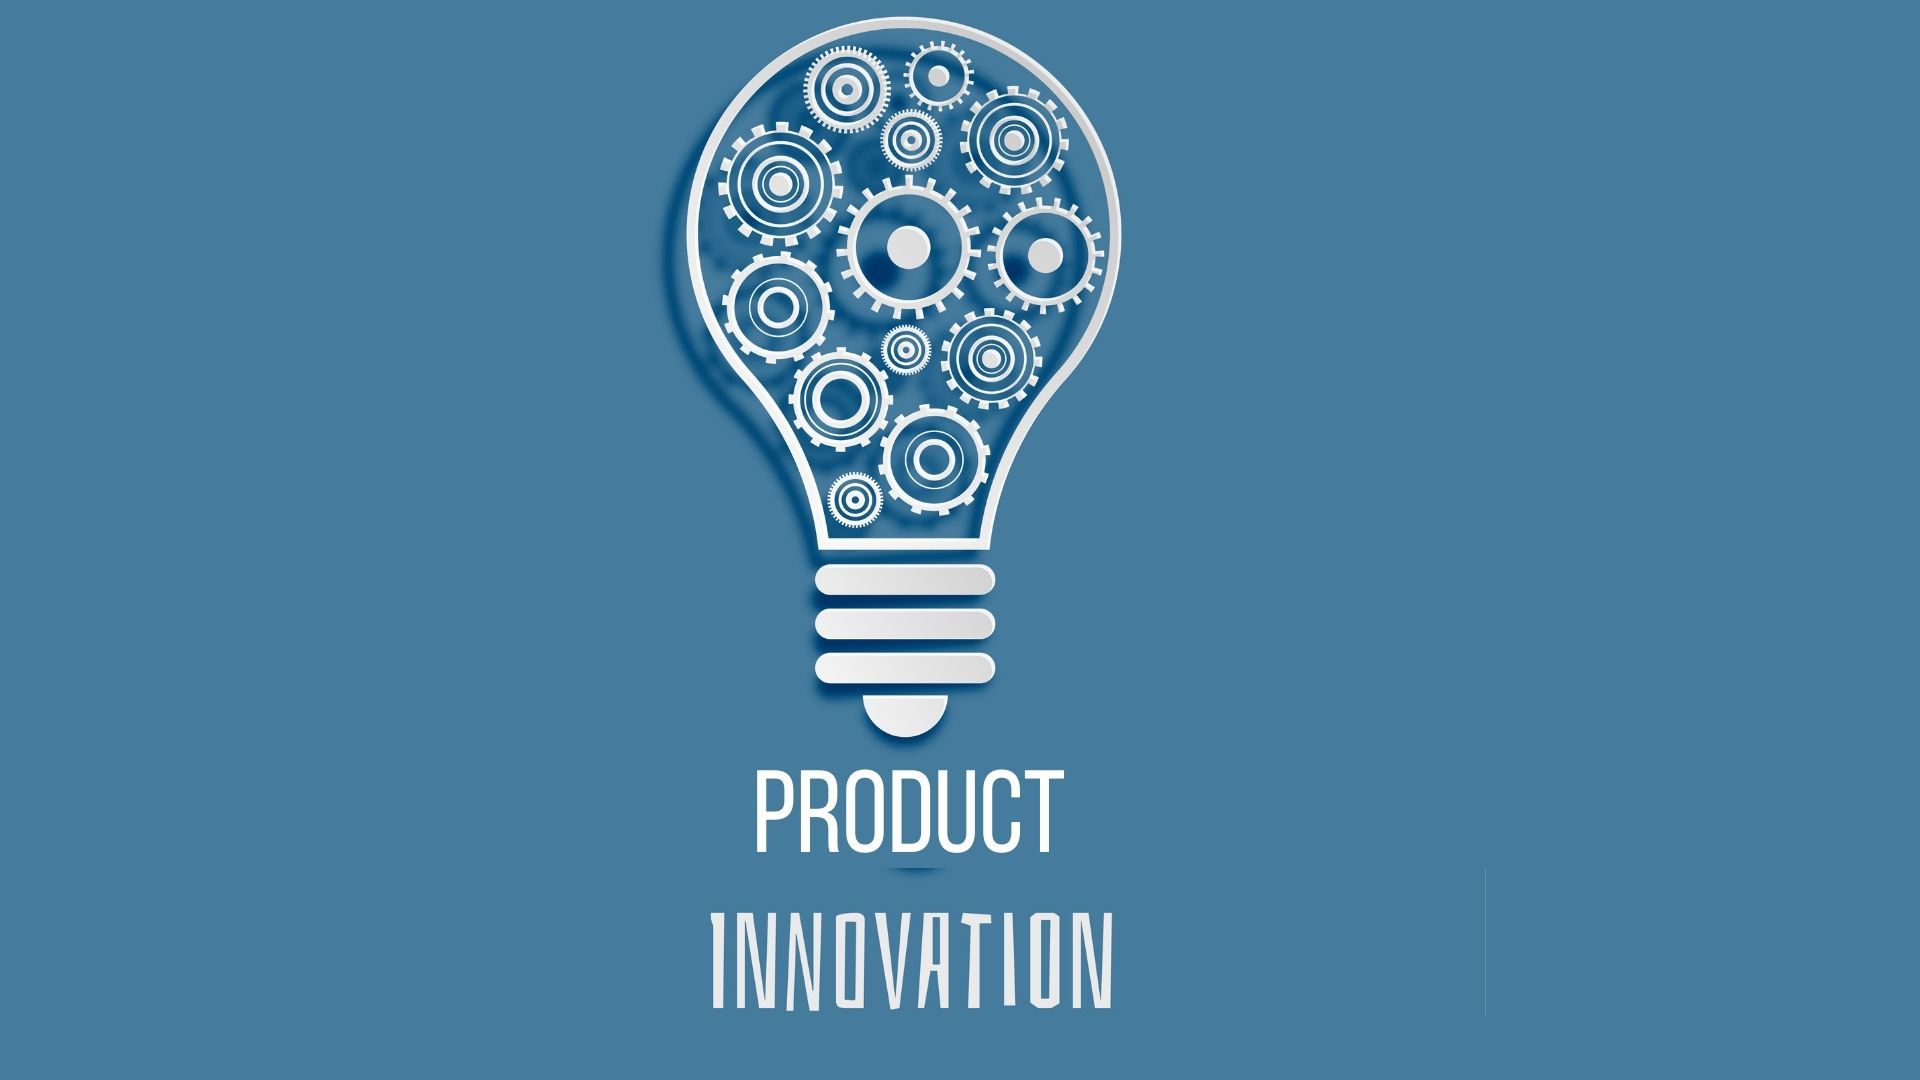 Product Innovation Meaning Advantages Disadvantages | The Brand Hopper